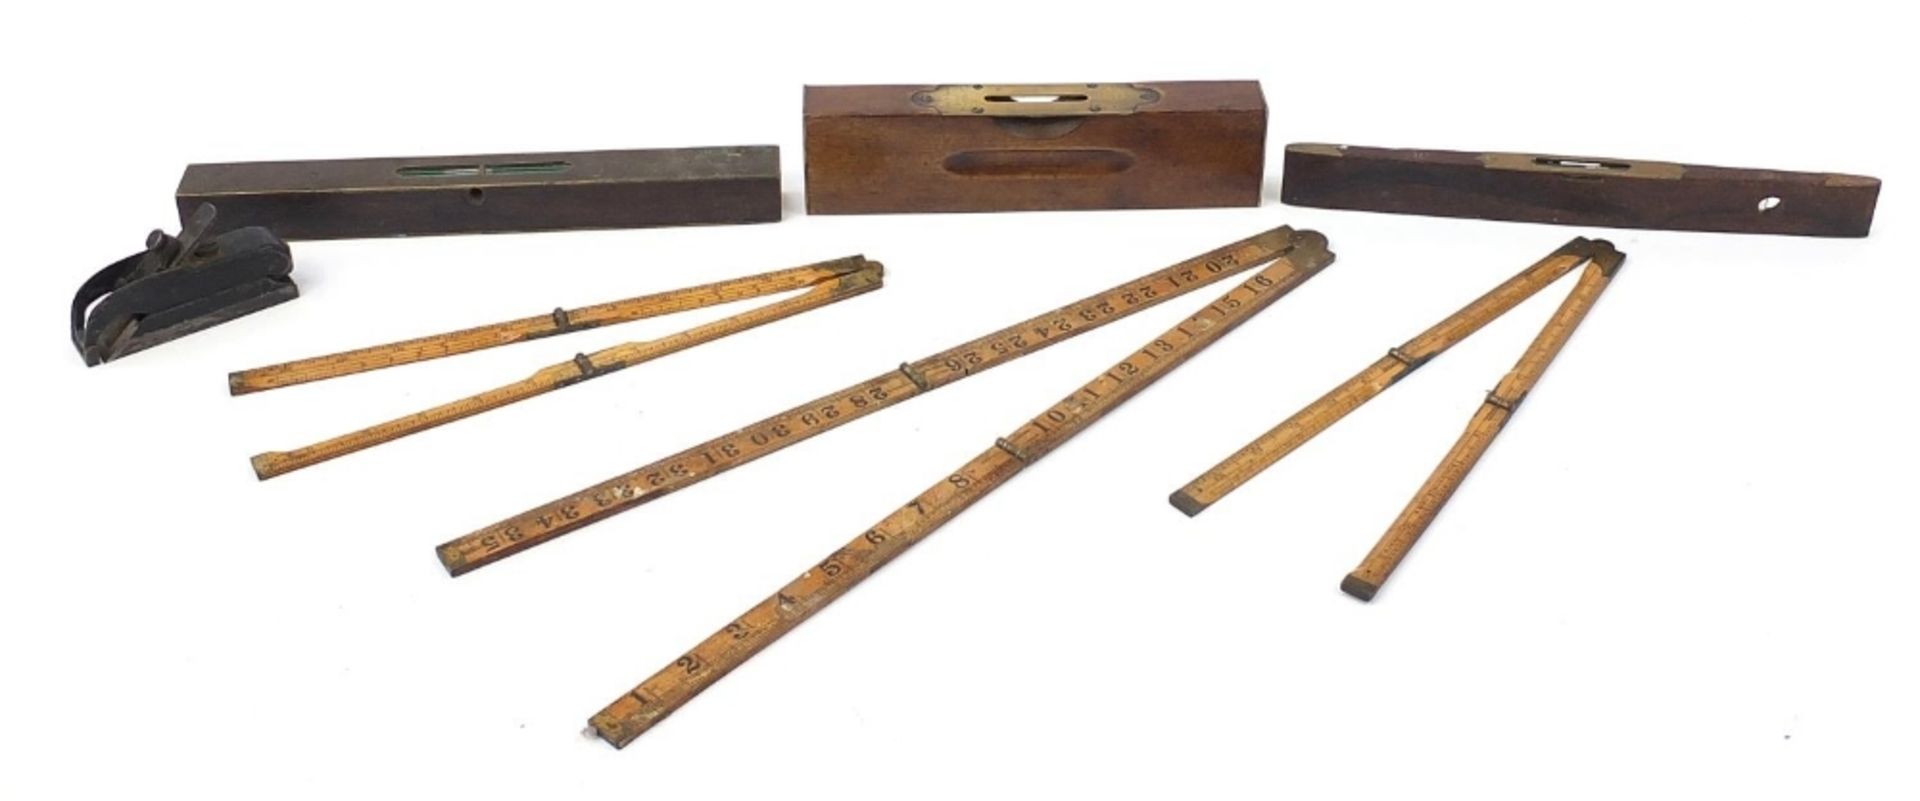 Antique and later rules, levels and a smoothing plane including J Rabone & Sons : For Further